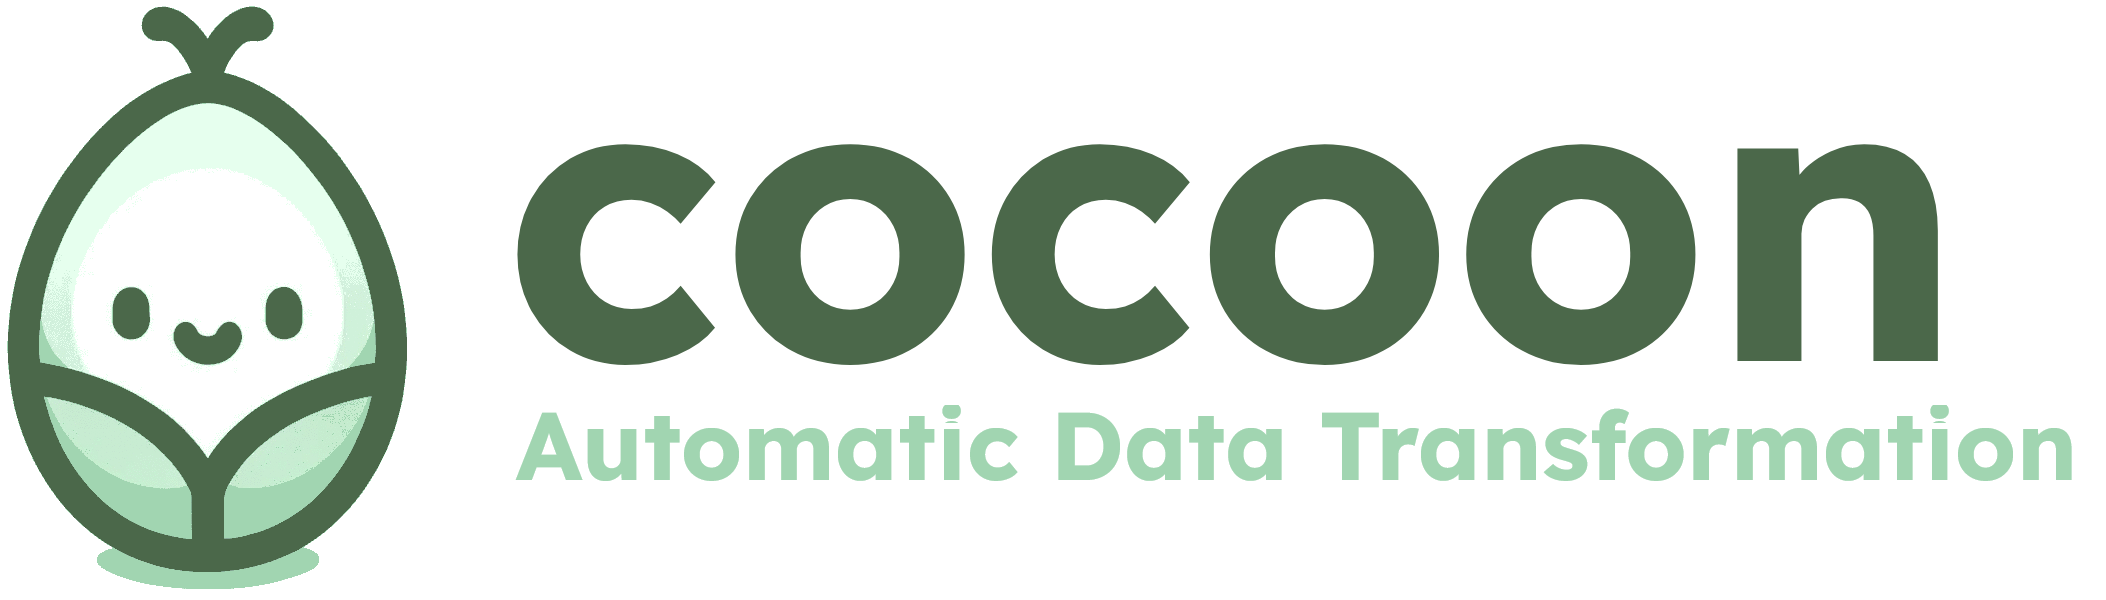 cocoon_logo.png